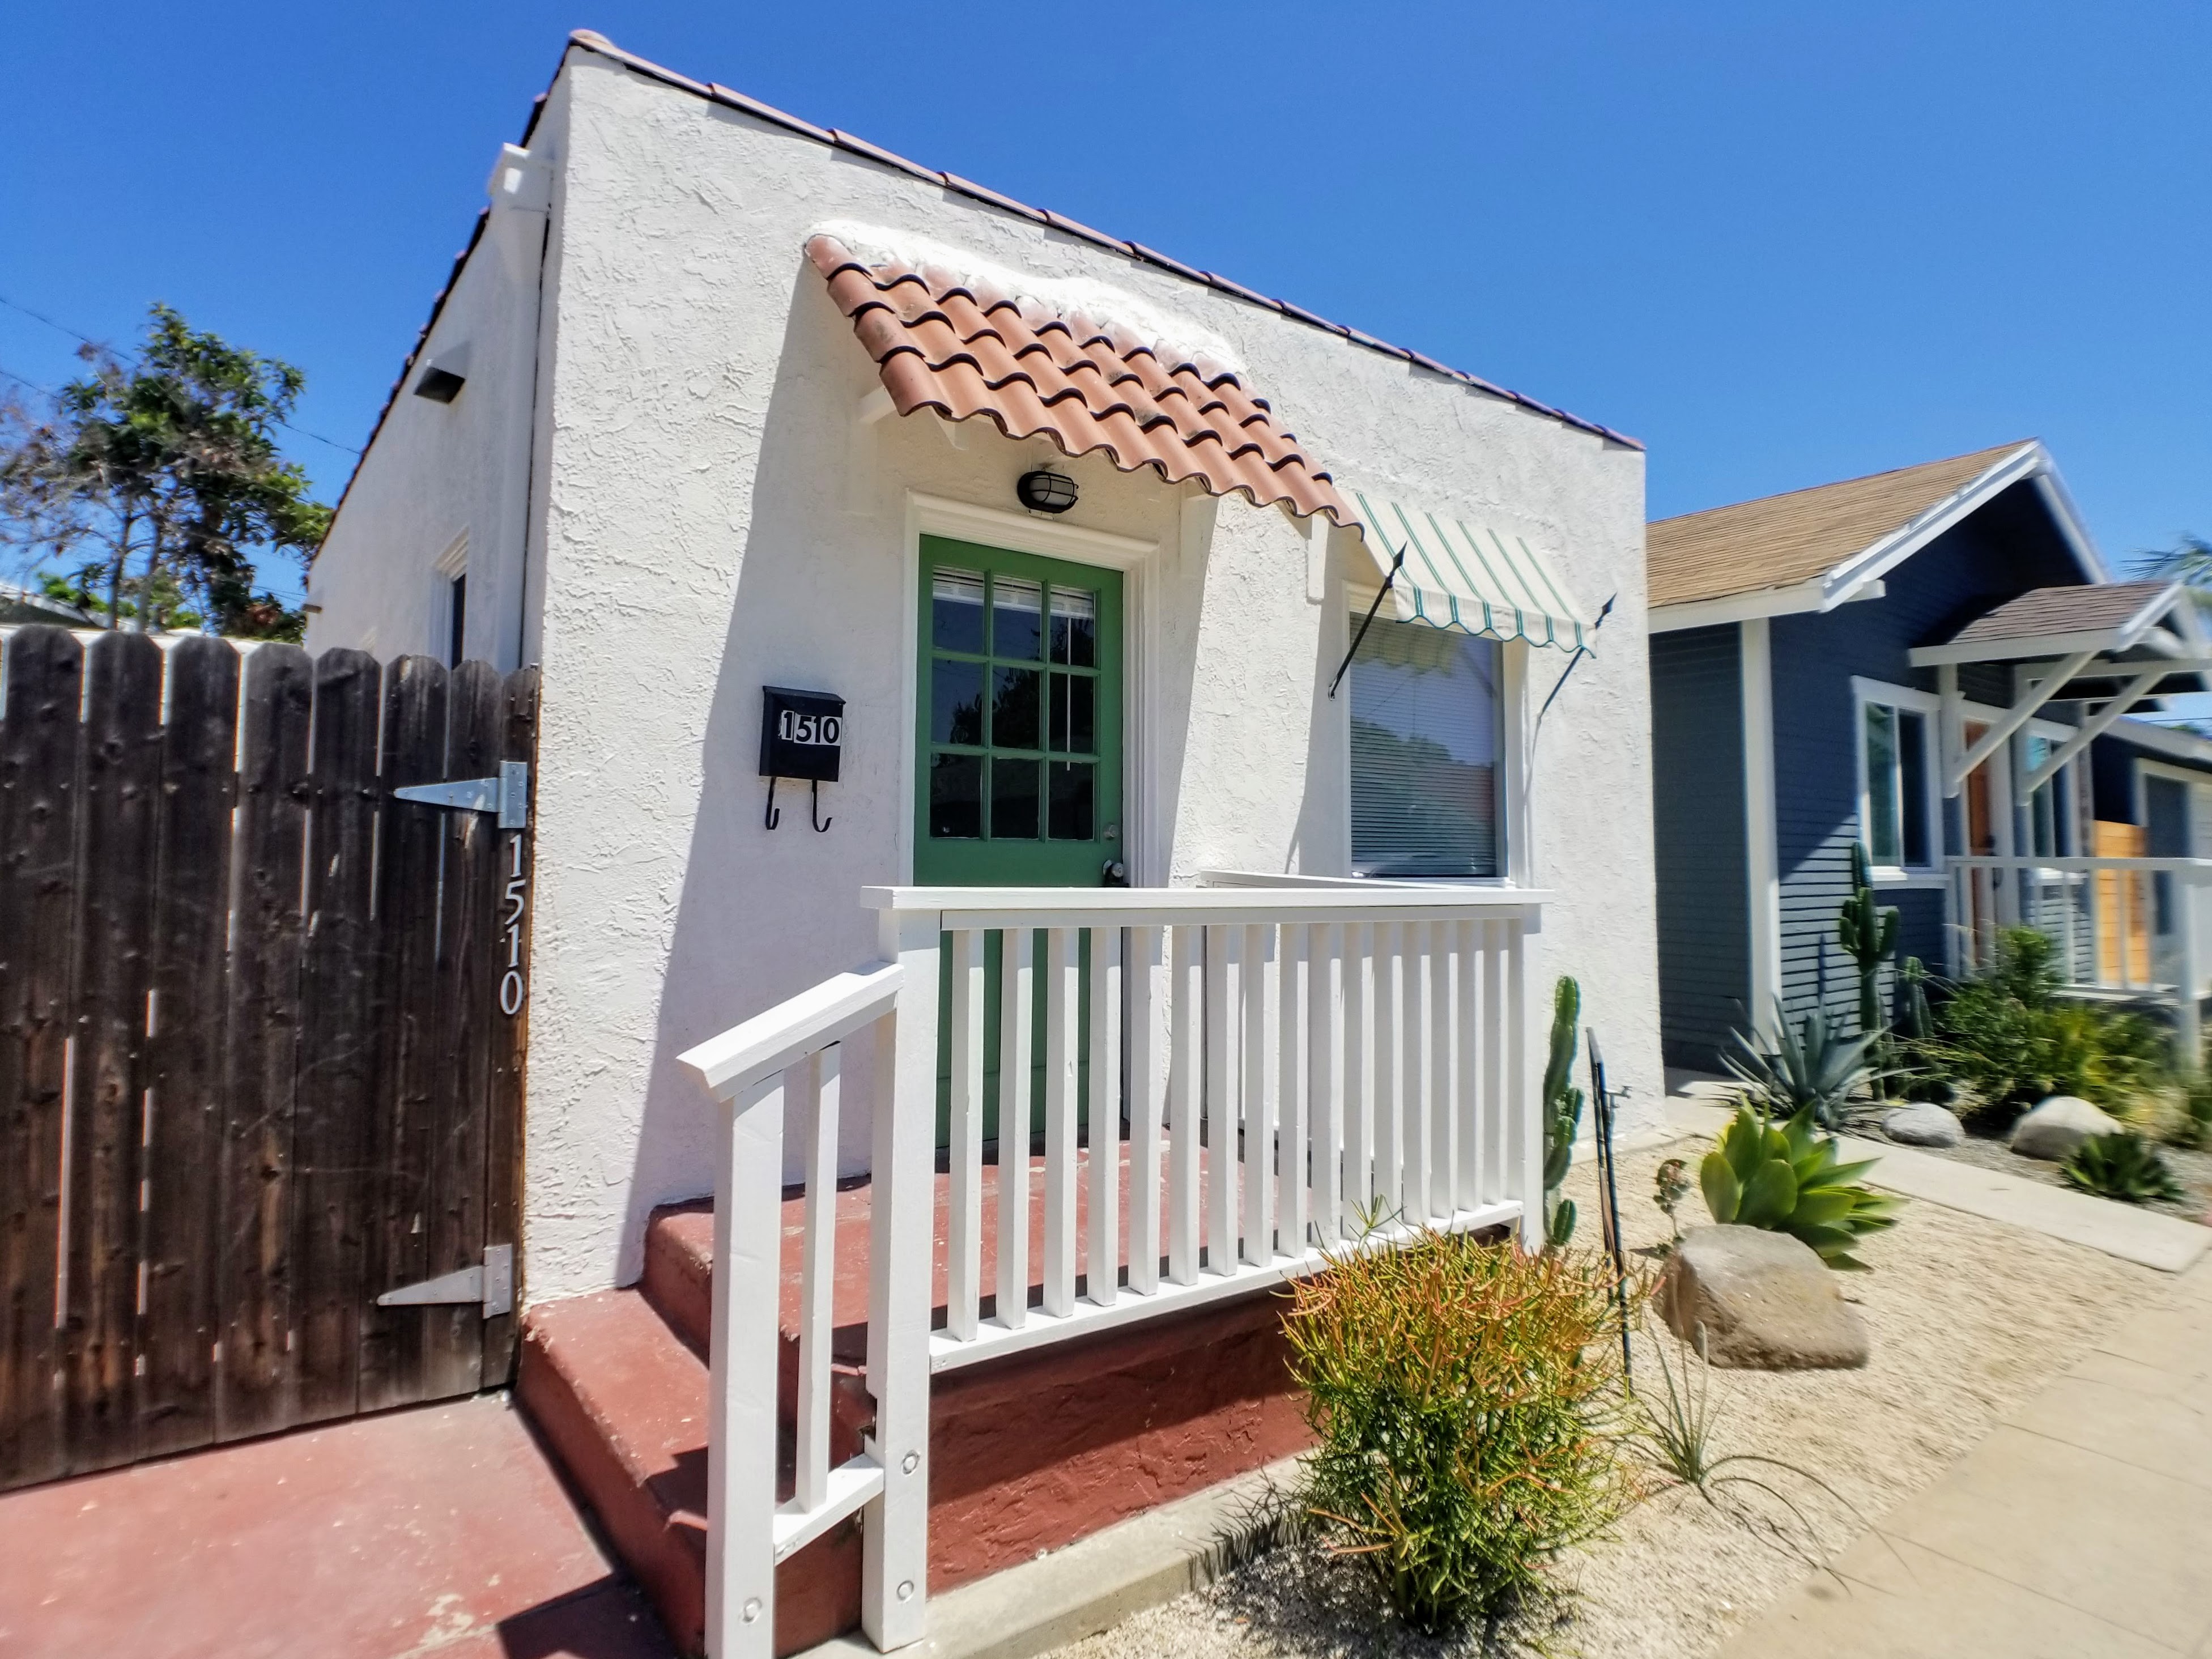 Property Listing for 7/31/20